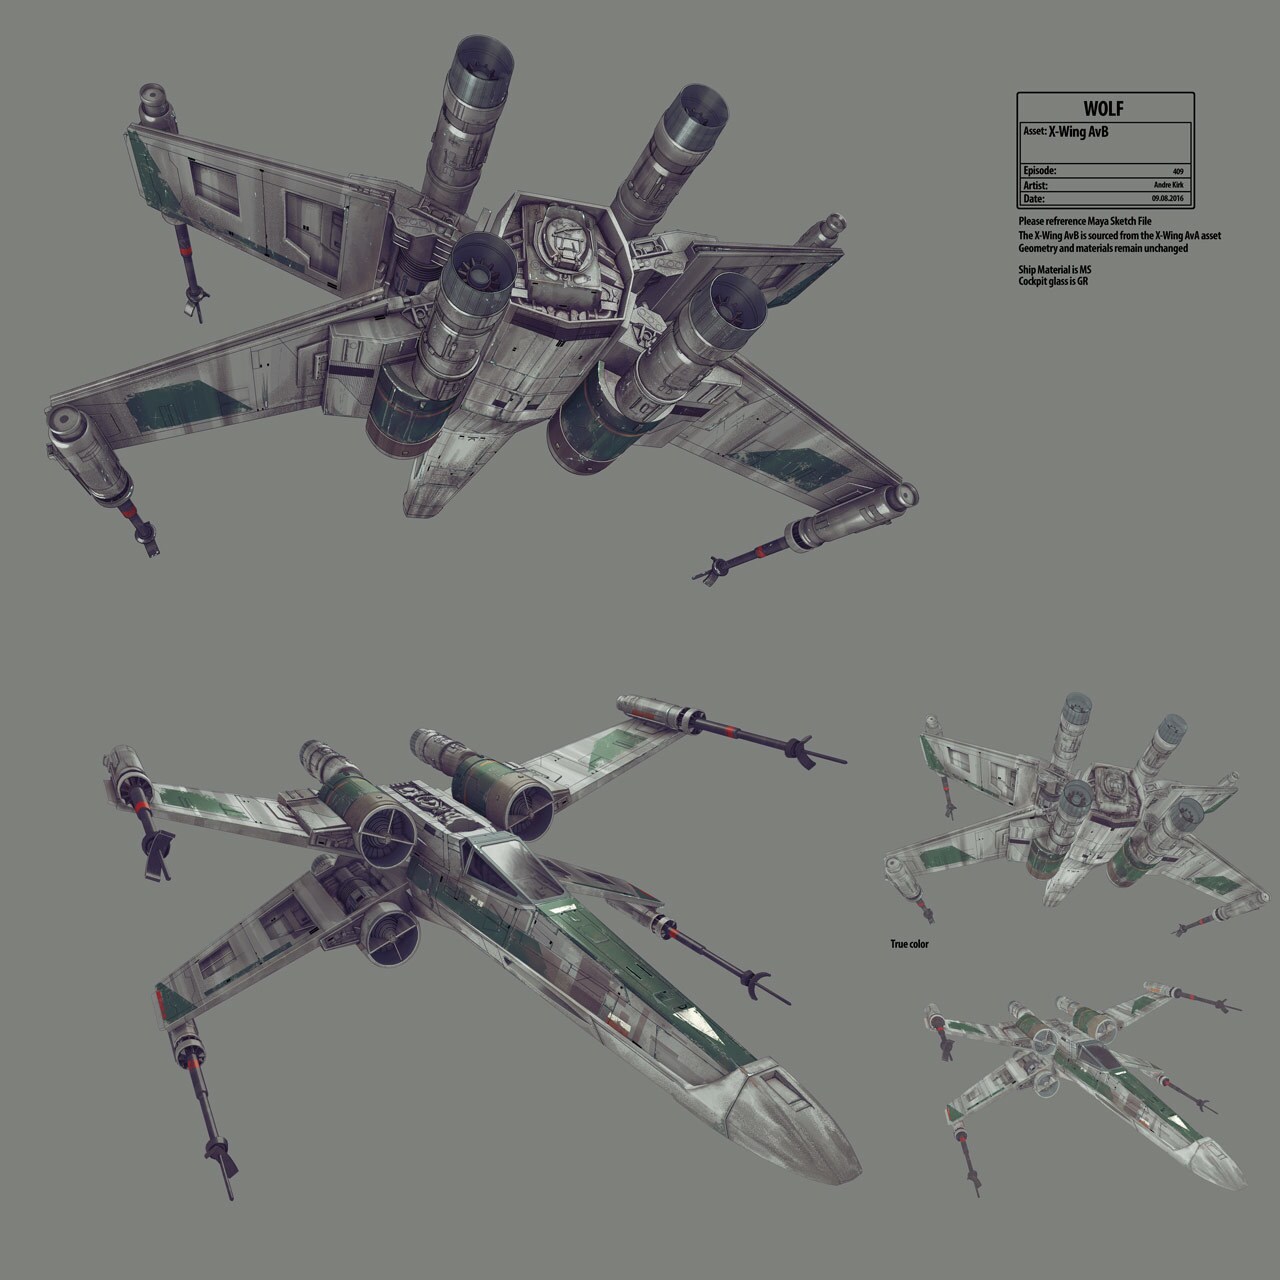 X-wing concept art by Andre Kirk.